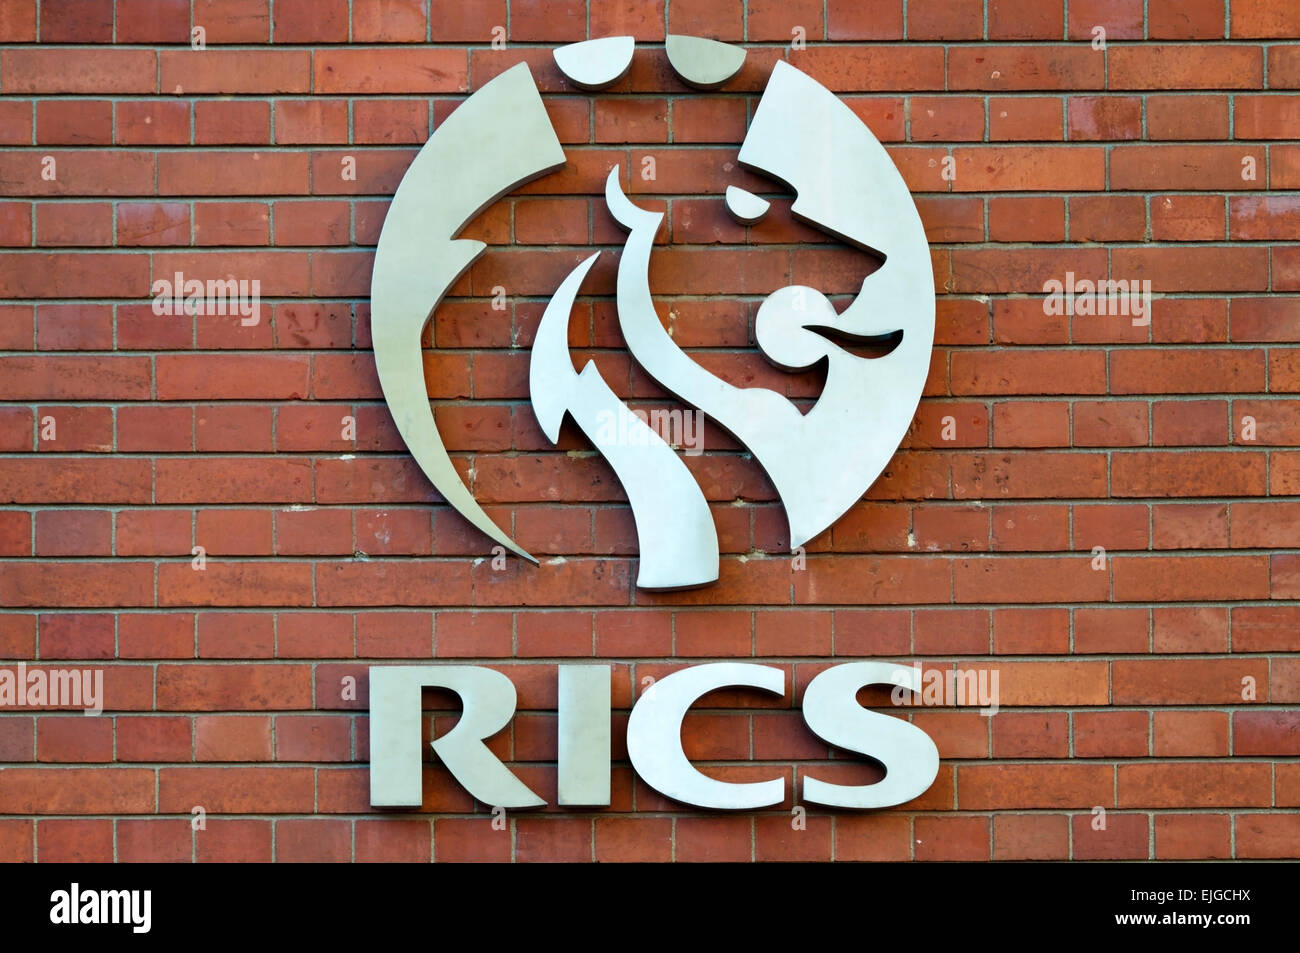 Symbol of the RICS, Royal Institute of Chartered Surveyors, on their headquarters building in central London. Stock Photo